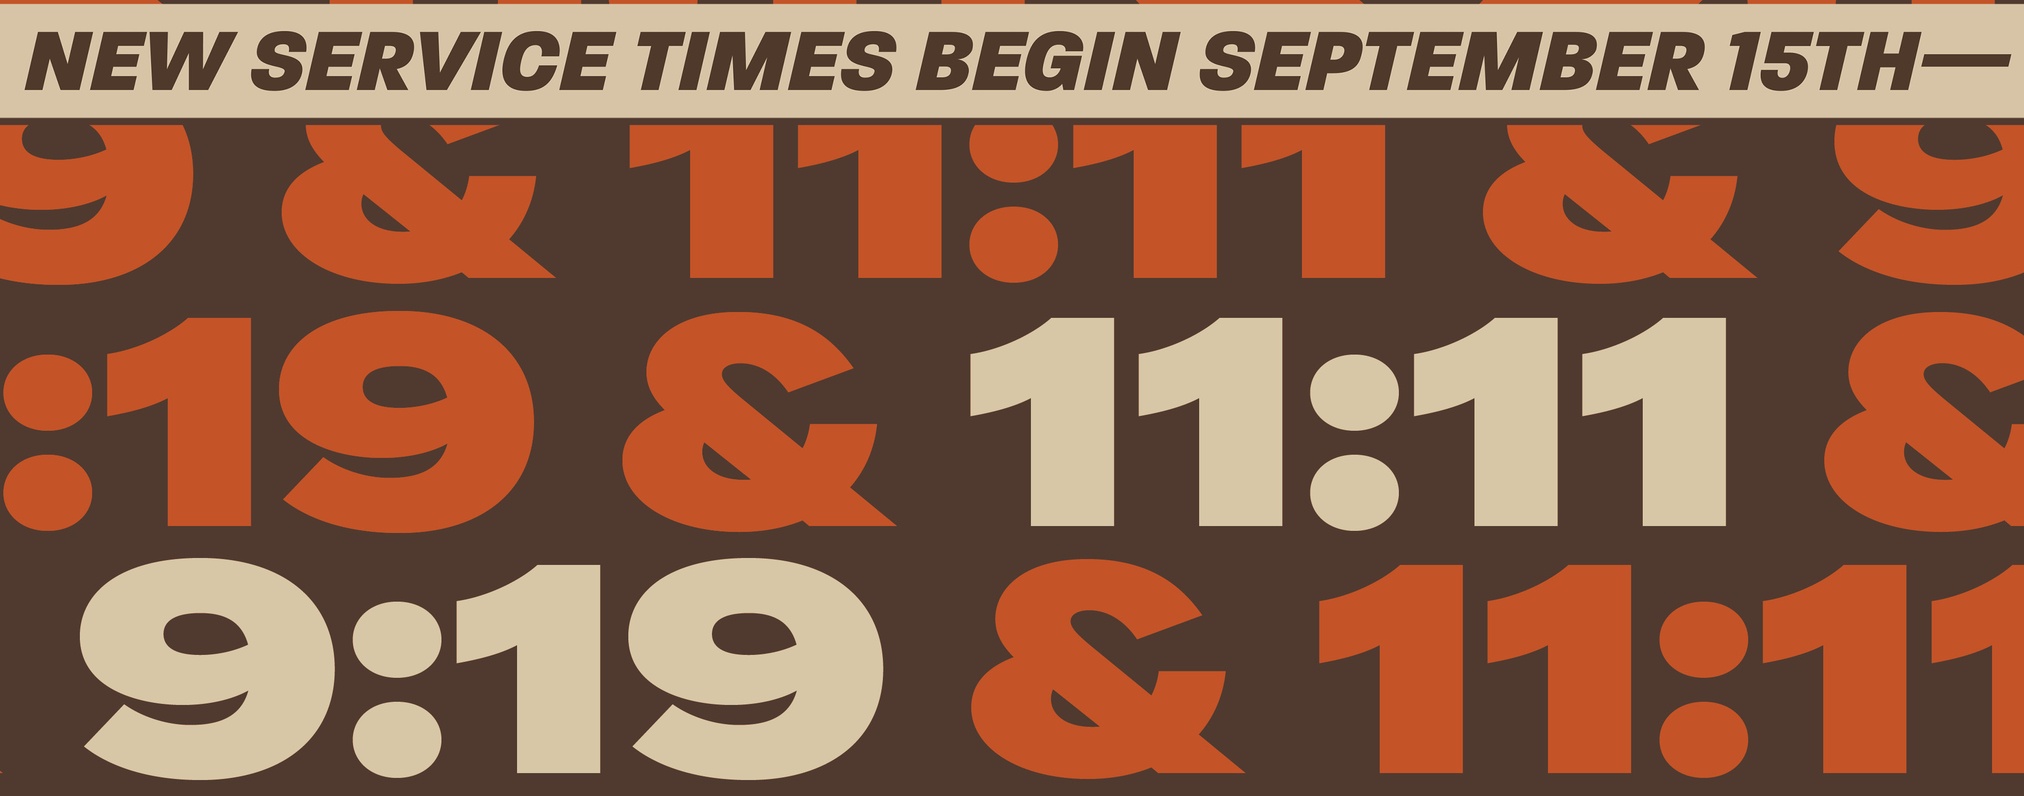 New service times start September 15th at 9:19am and 11:11am